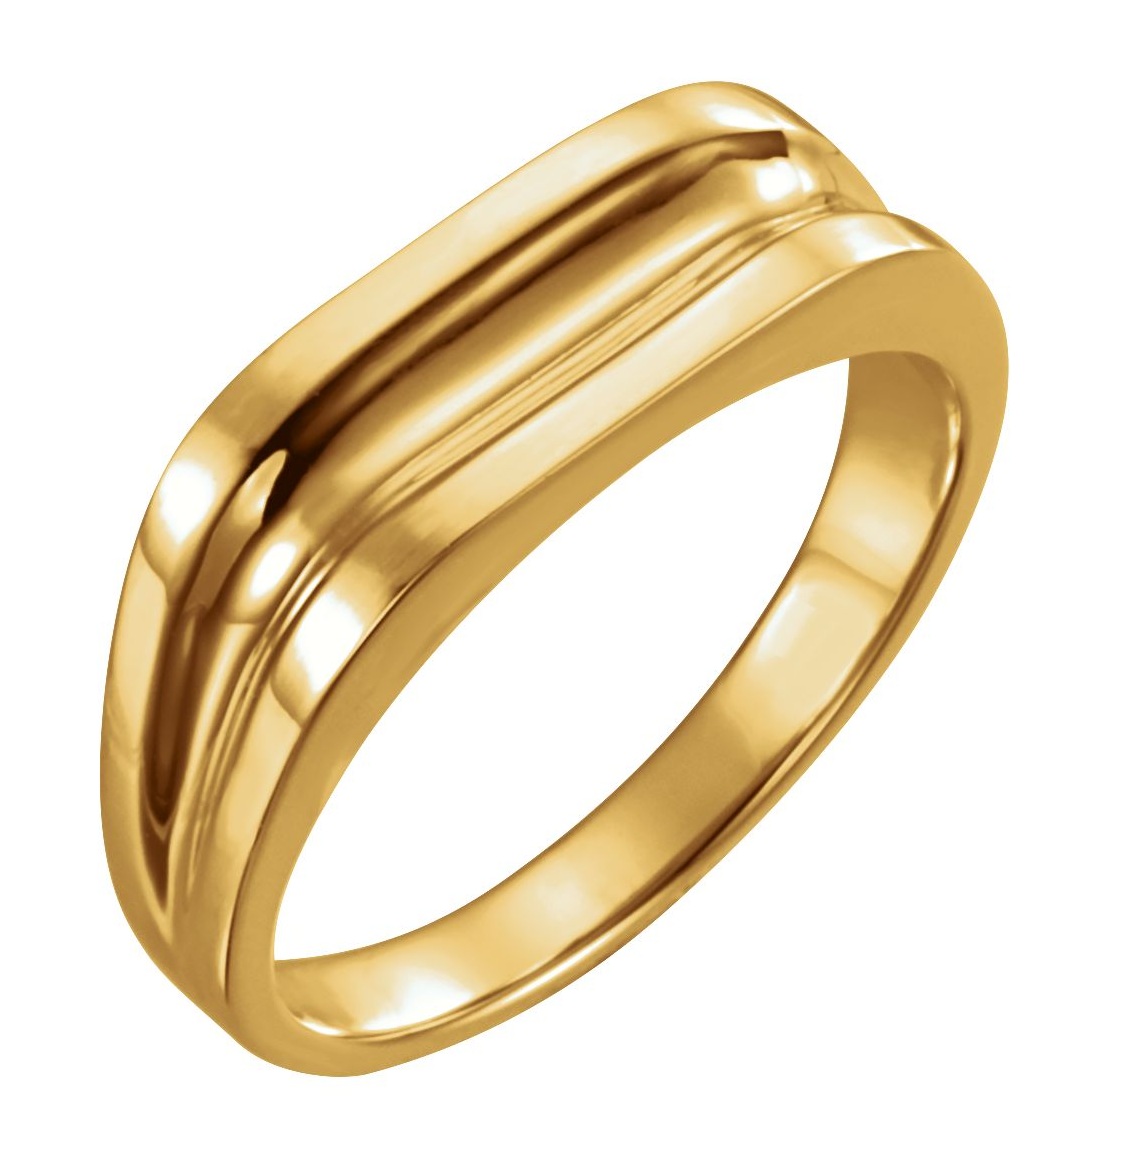 Men's 14k Yellow Gold Grooved Ring